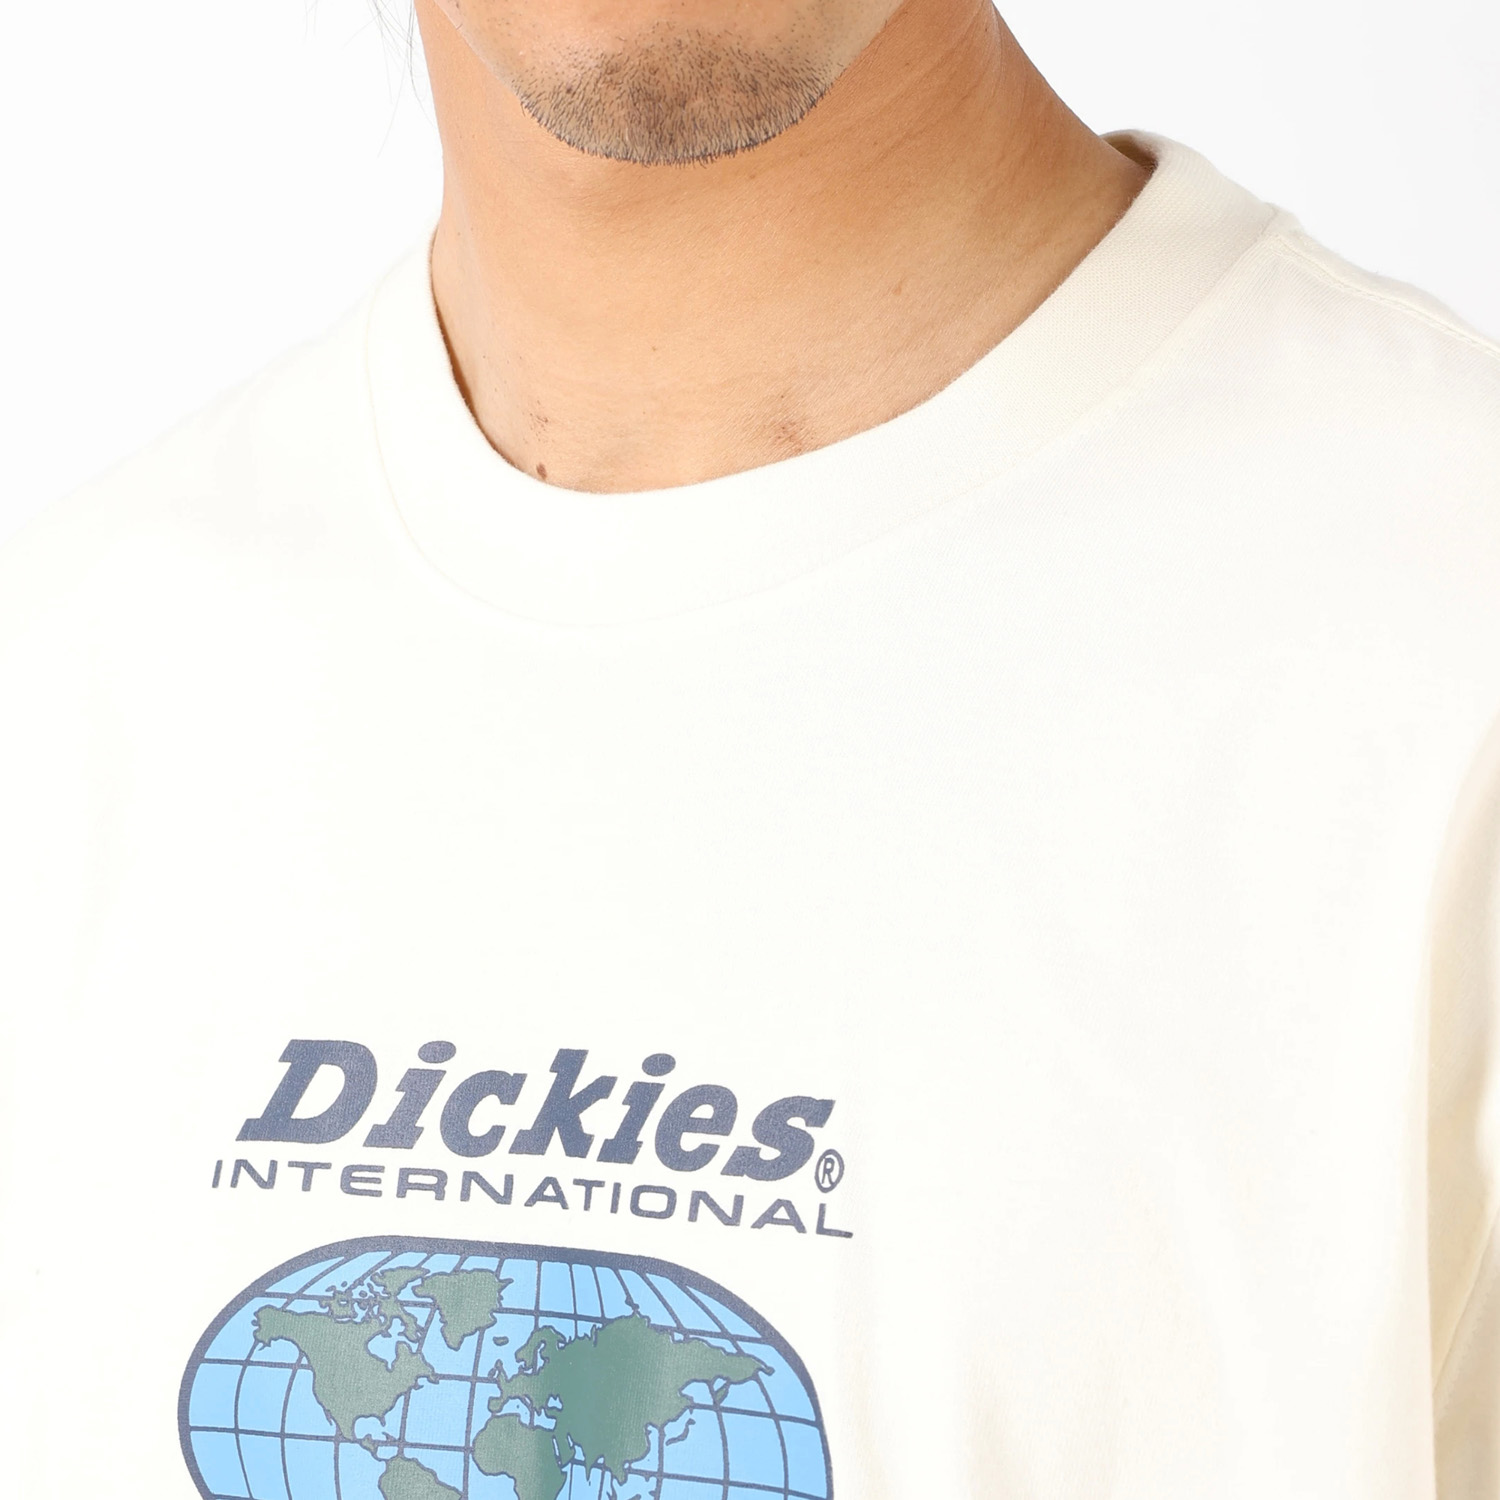 Jake Hayes グラフィック Tシャツ "Dickies Internaional” image number 6